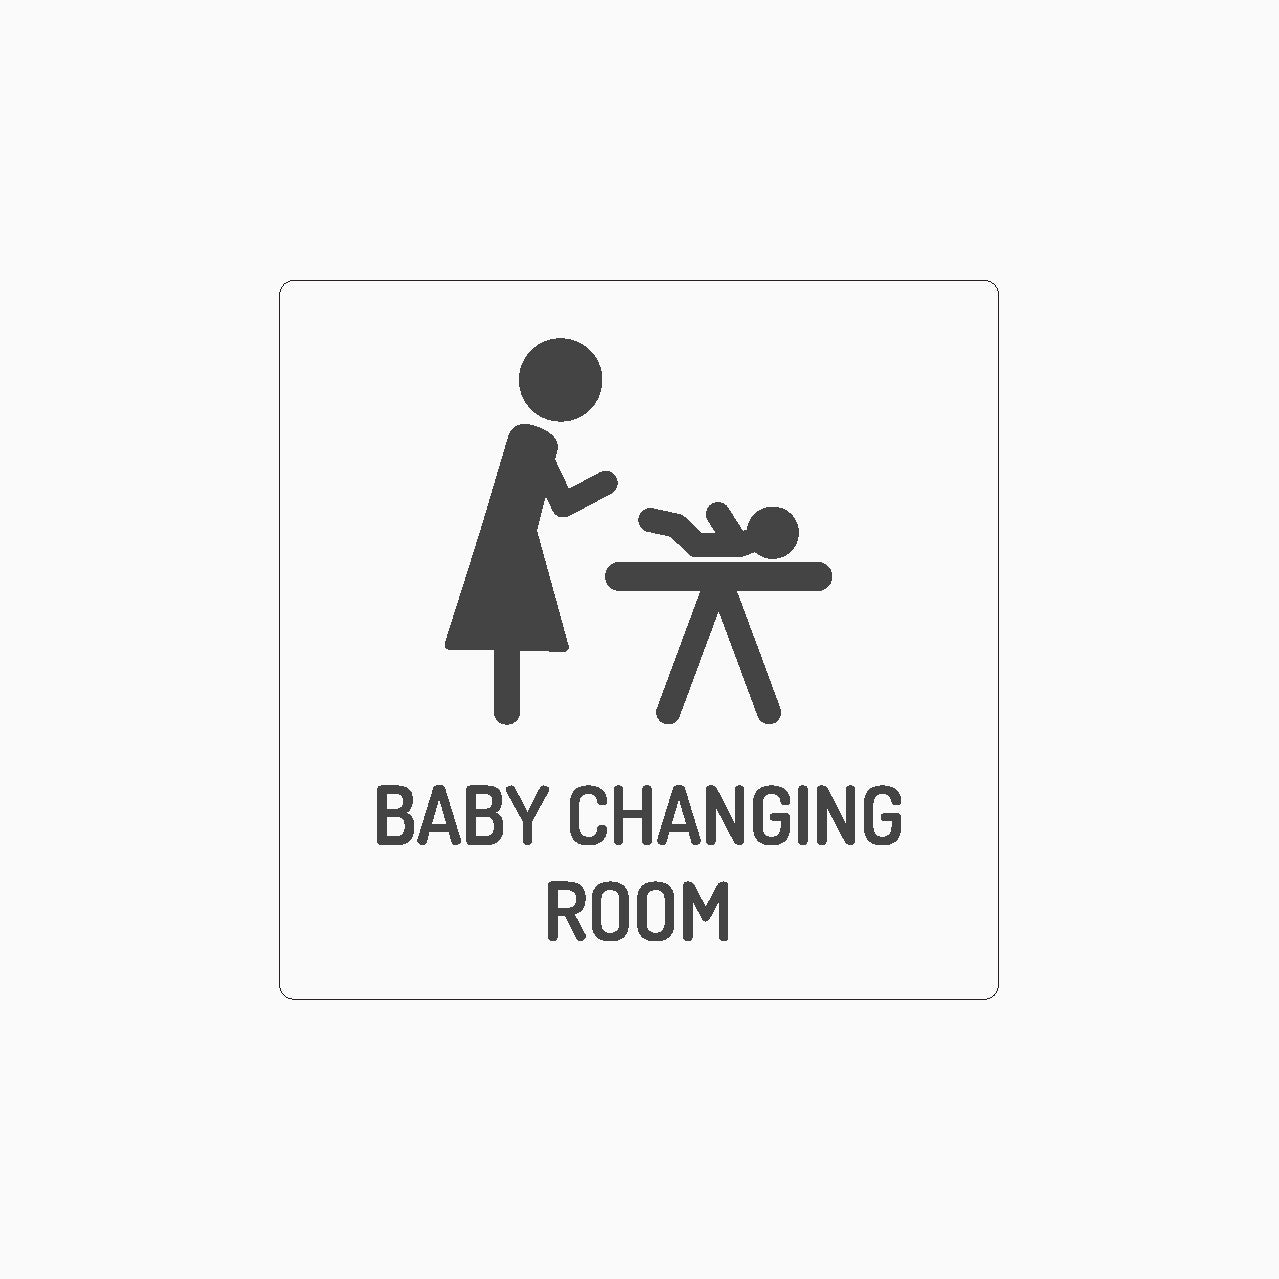 BABY CHANGING ROOM SIGN